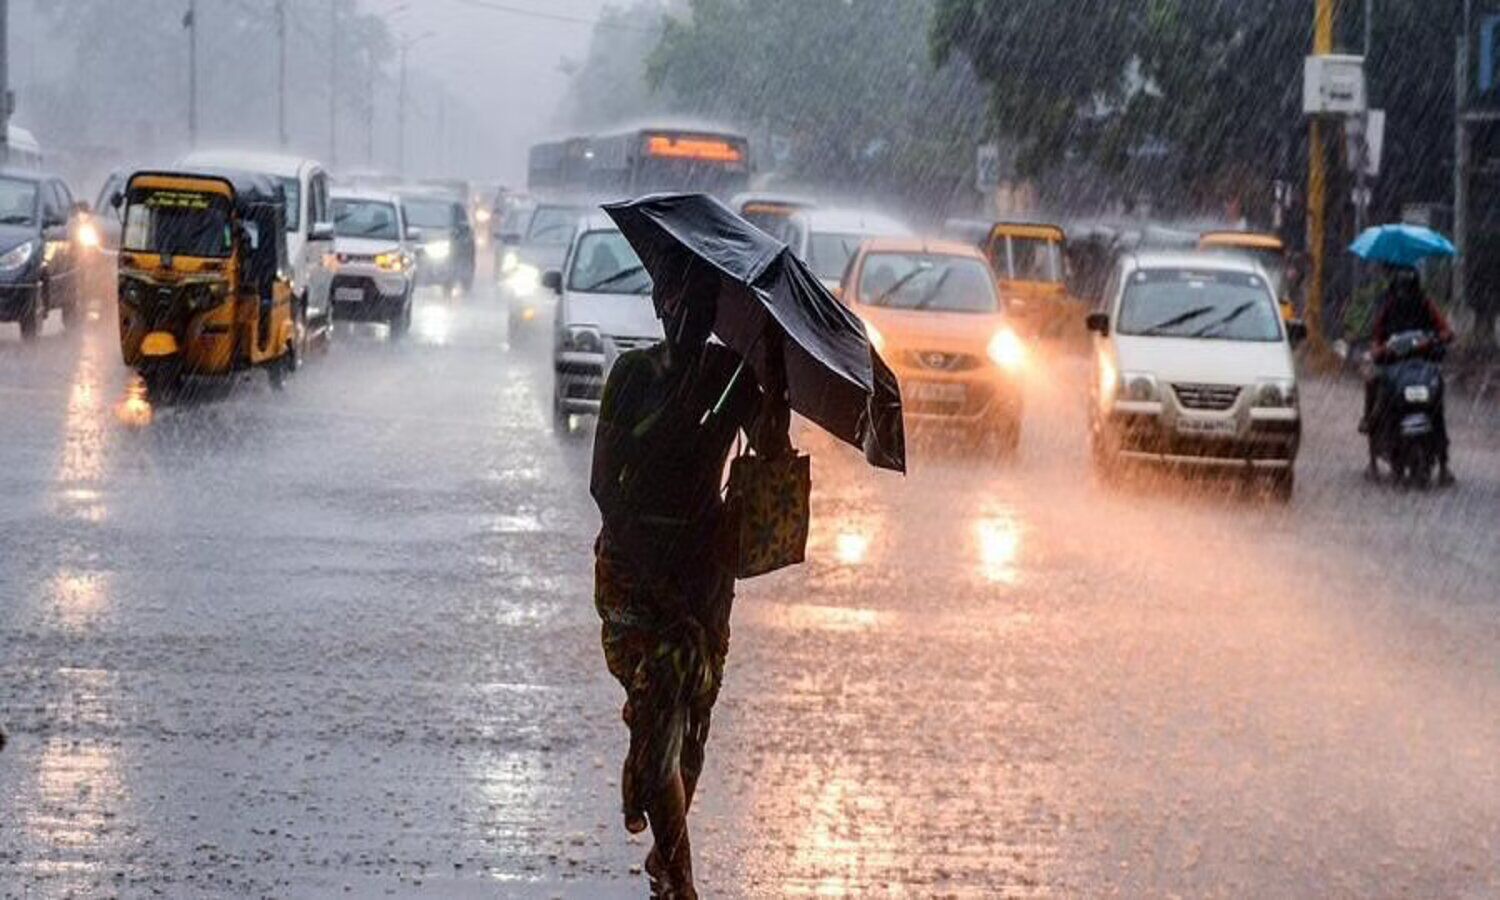 Weather Today: Heavy rain alert in these states today, Monsoon kind in many more states